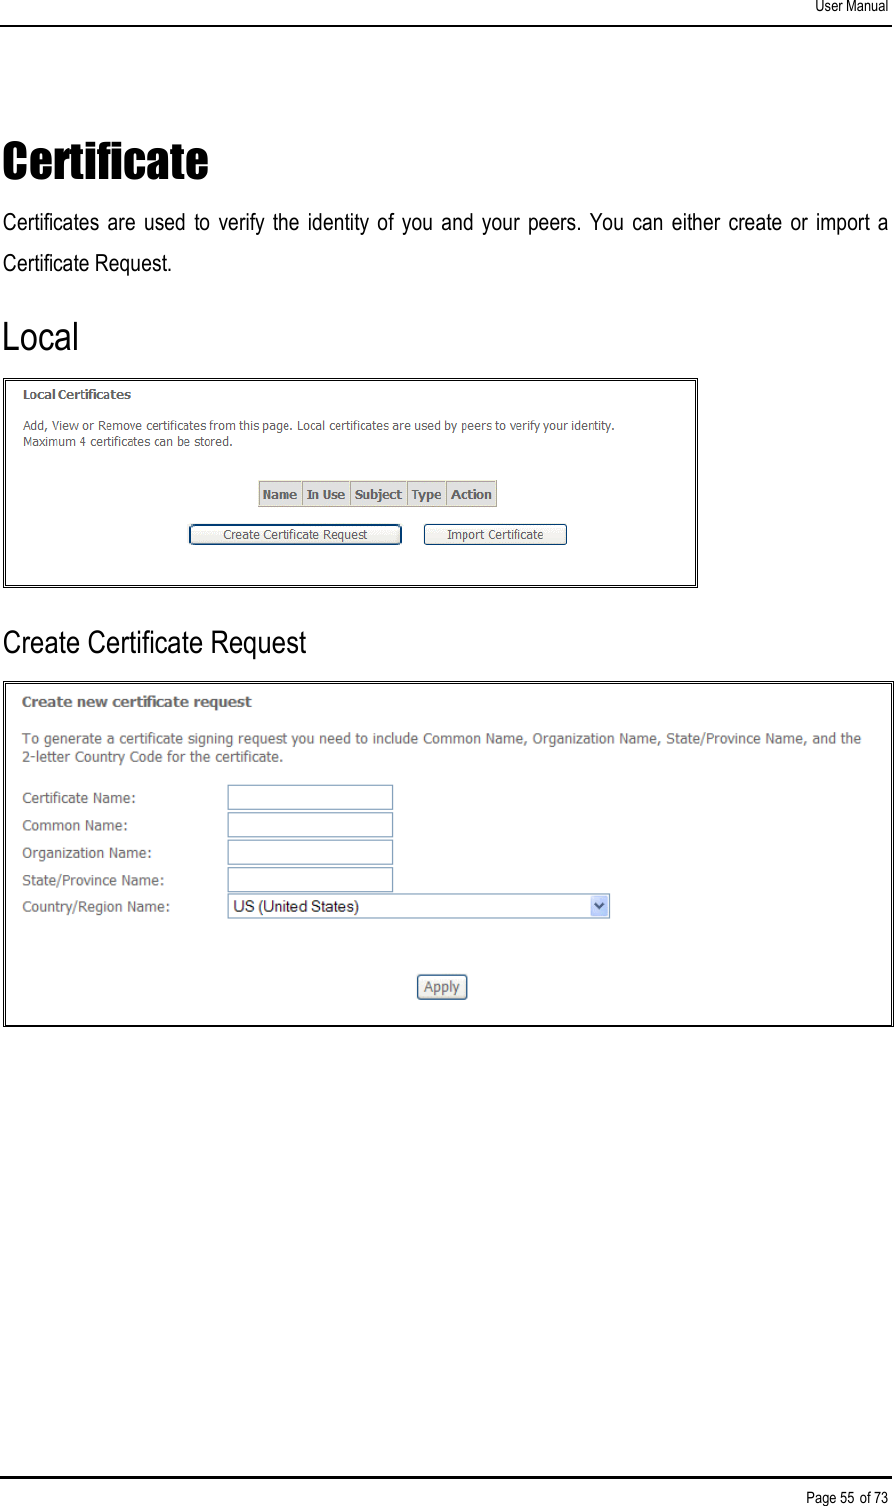 User Manual Page 55 of 73 Certificate Certificates  are  used  to  verify the  identity of  you  and your  peers.  You  can  either  create  or  import  a Certificate Request. Local  Create Certificate Request   